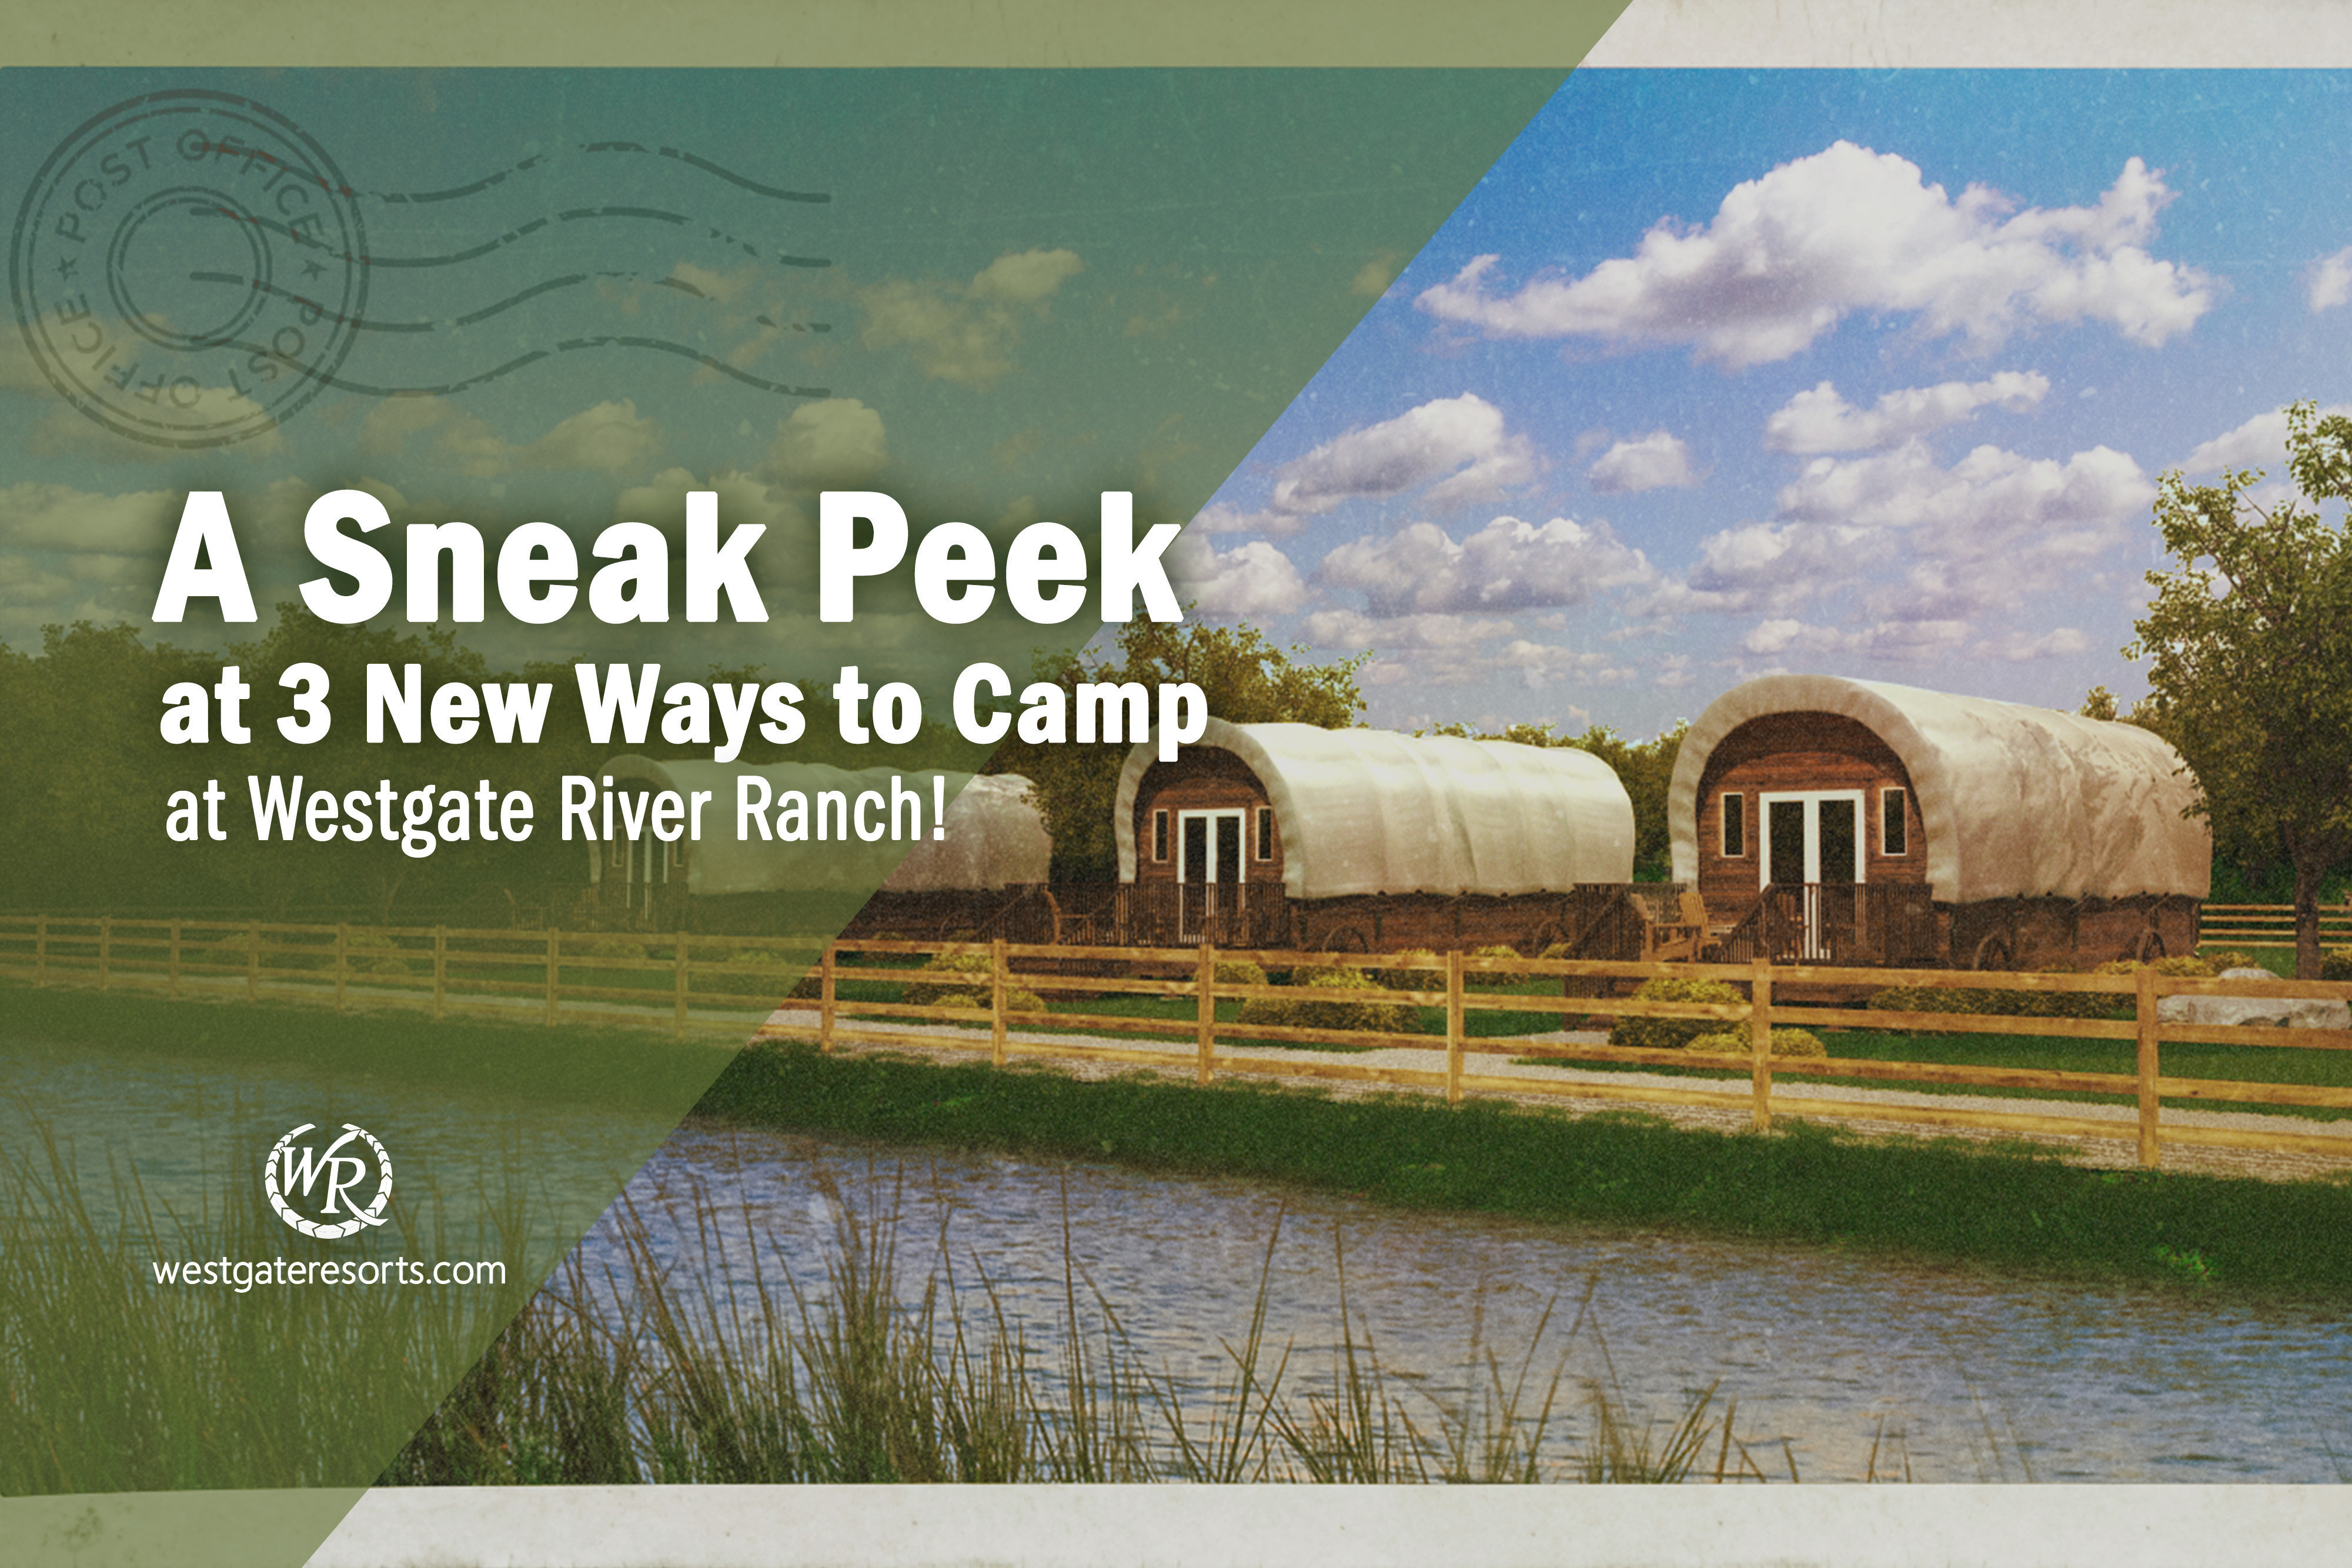 A Sneak Peek at 3 New Ways to Camp at Westgate River Ranch!